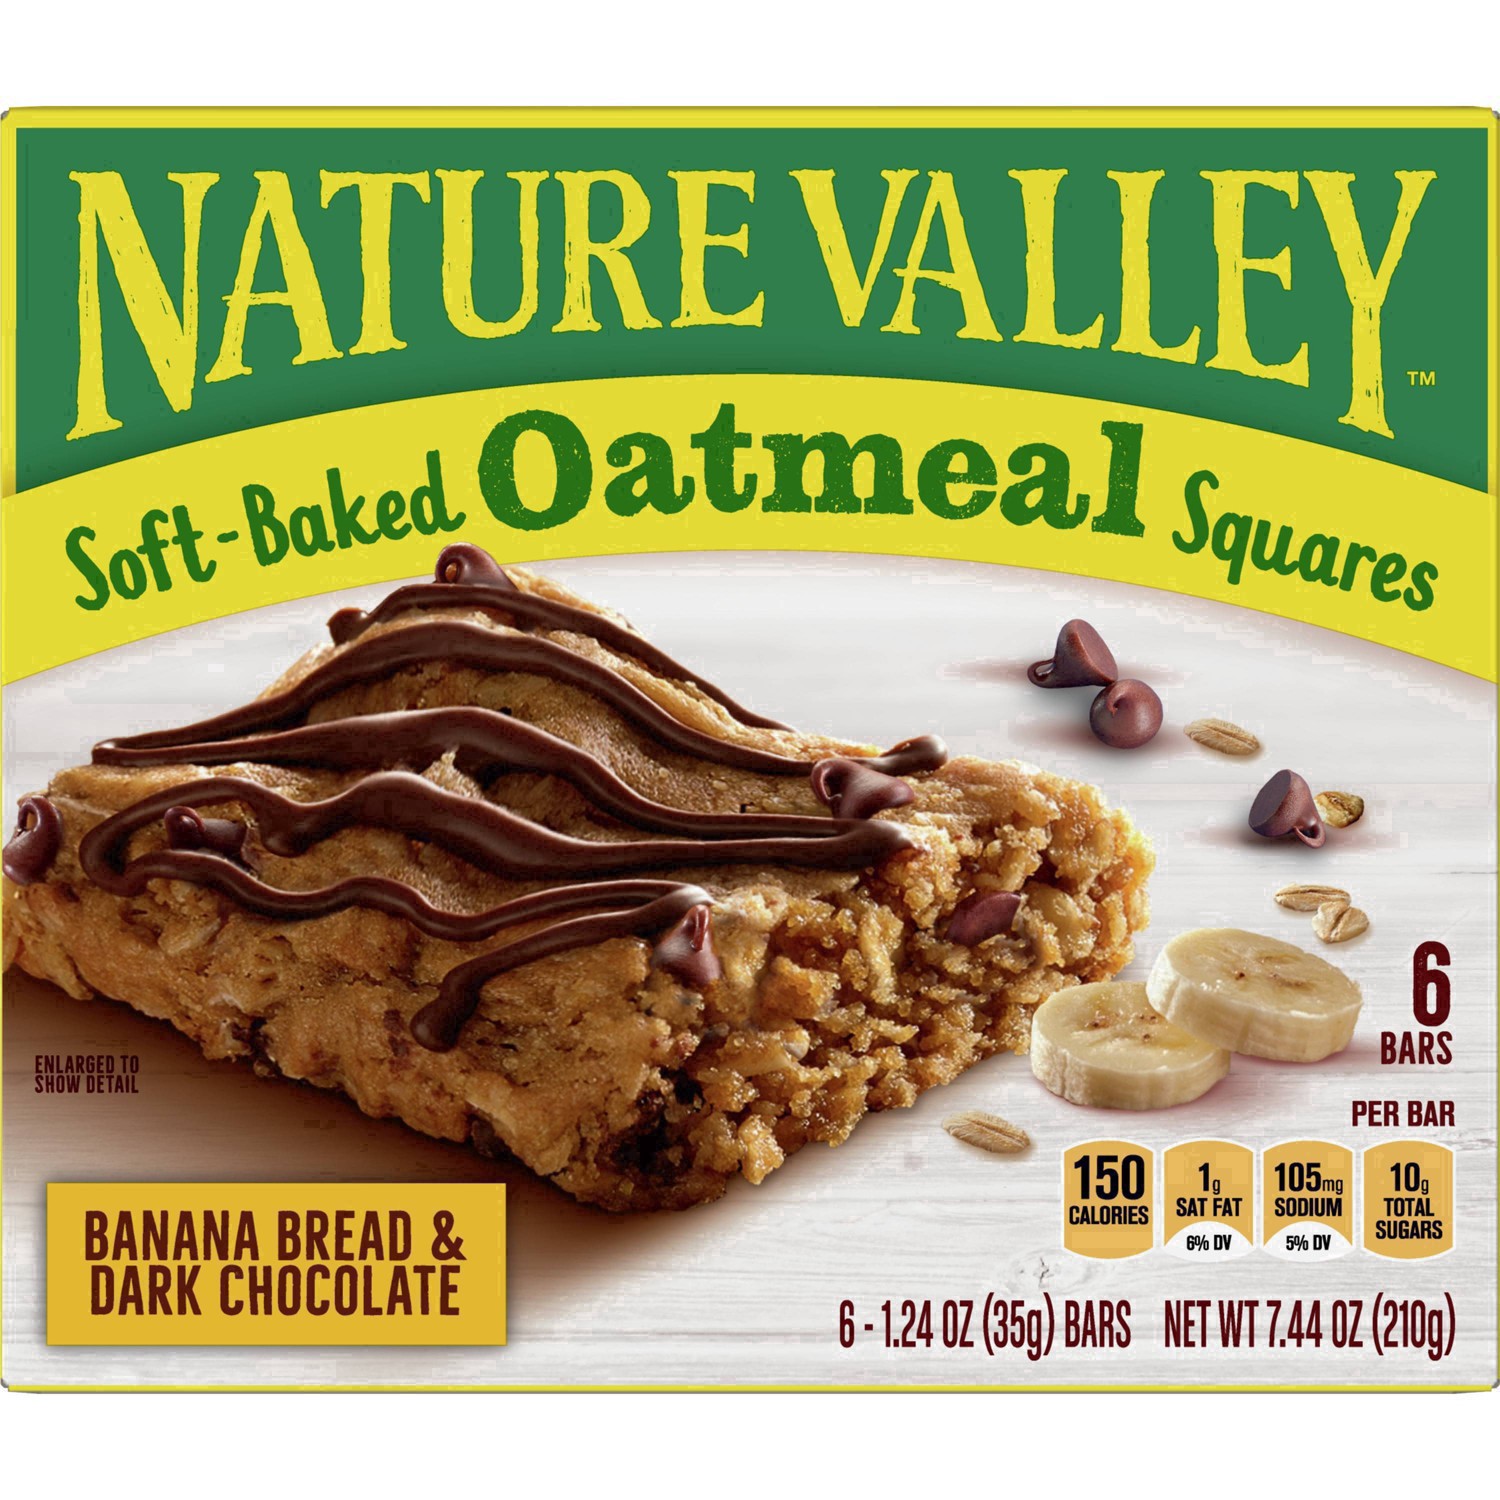 slide 72 of 101, Nature Valley Soft-Baked Oatmeal Squares, Banana Bread & Dark Chocolate, 6 ct, 6 ct